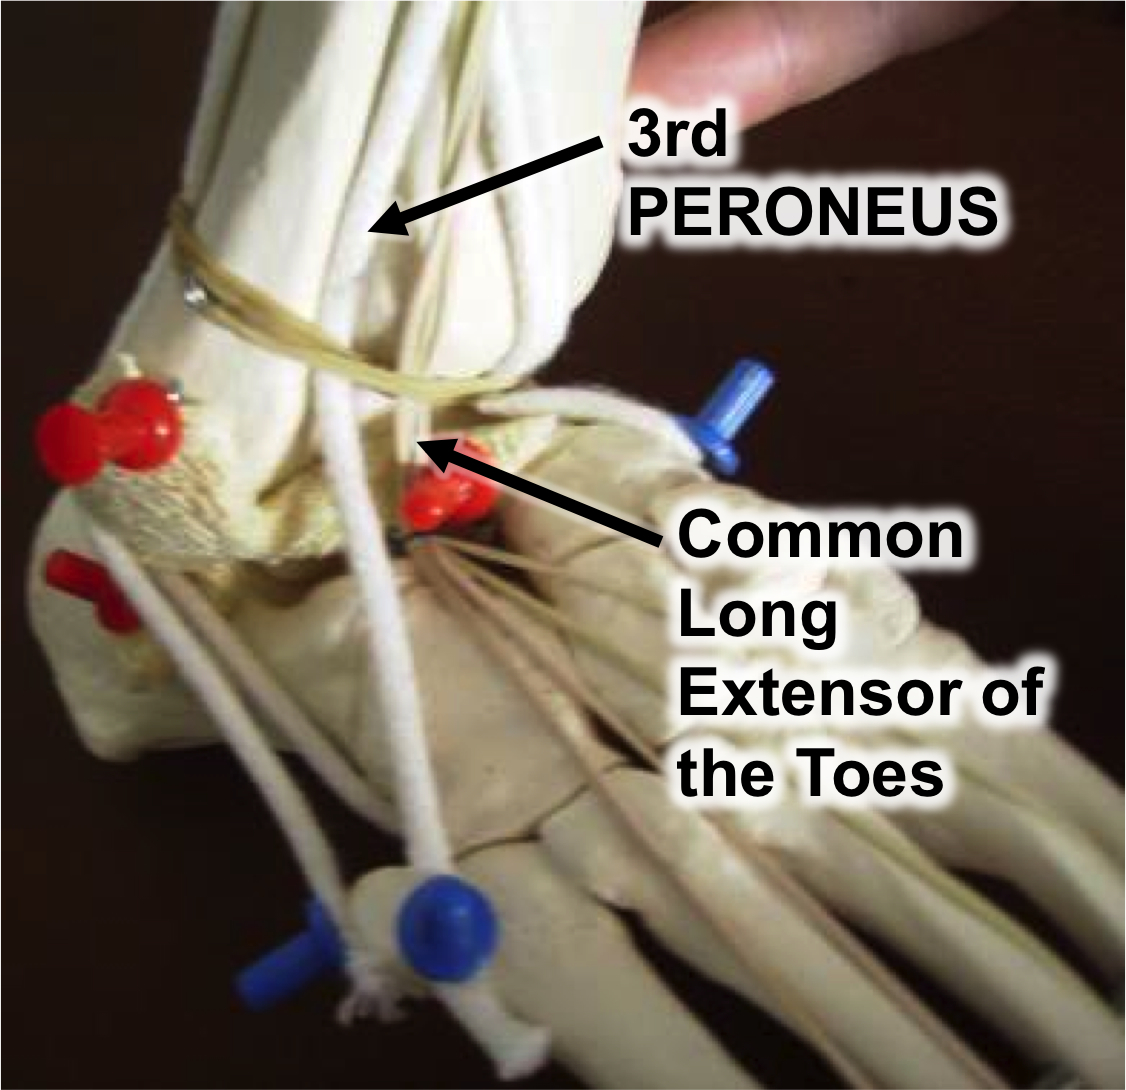 anatomy_ankle_pain